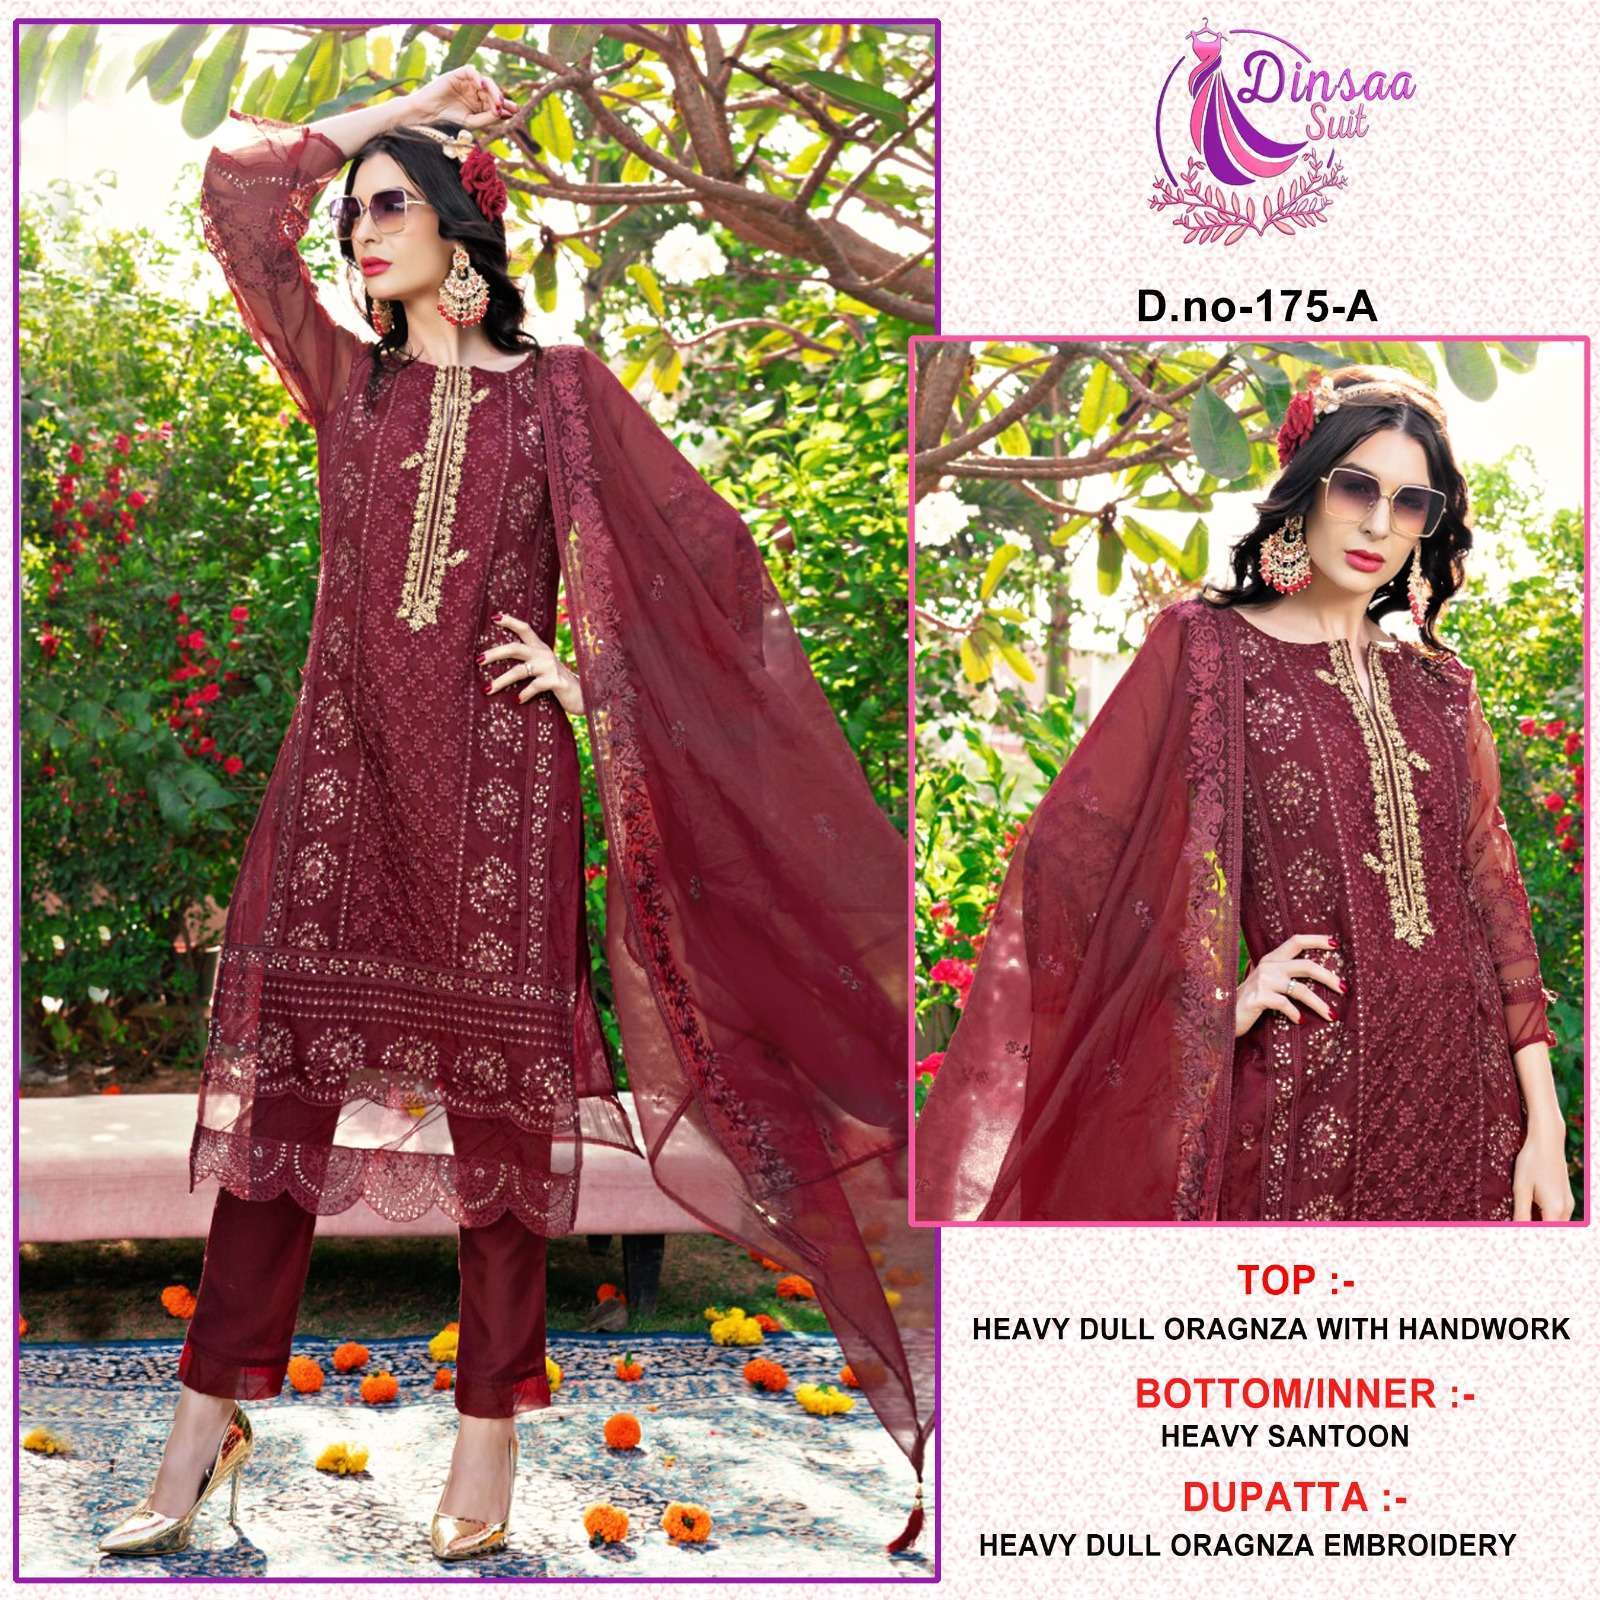 Dinsaa suit 175 Organza  with Embroidery work Pakistani suit...